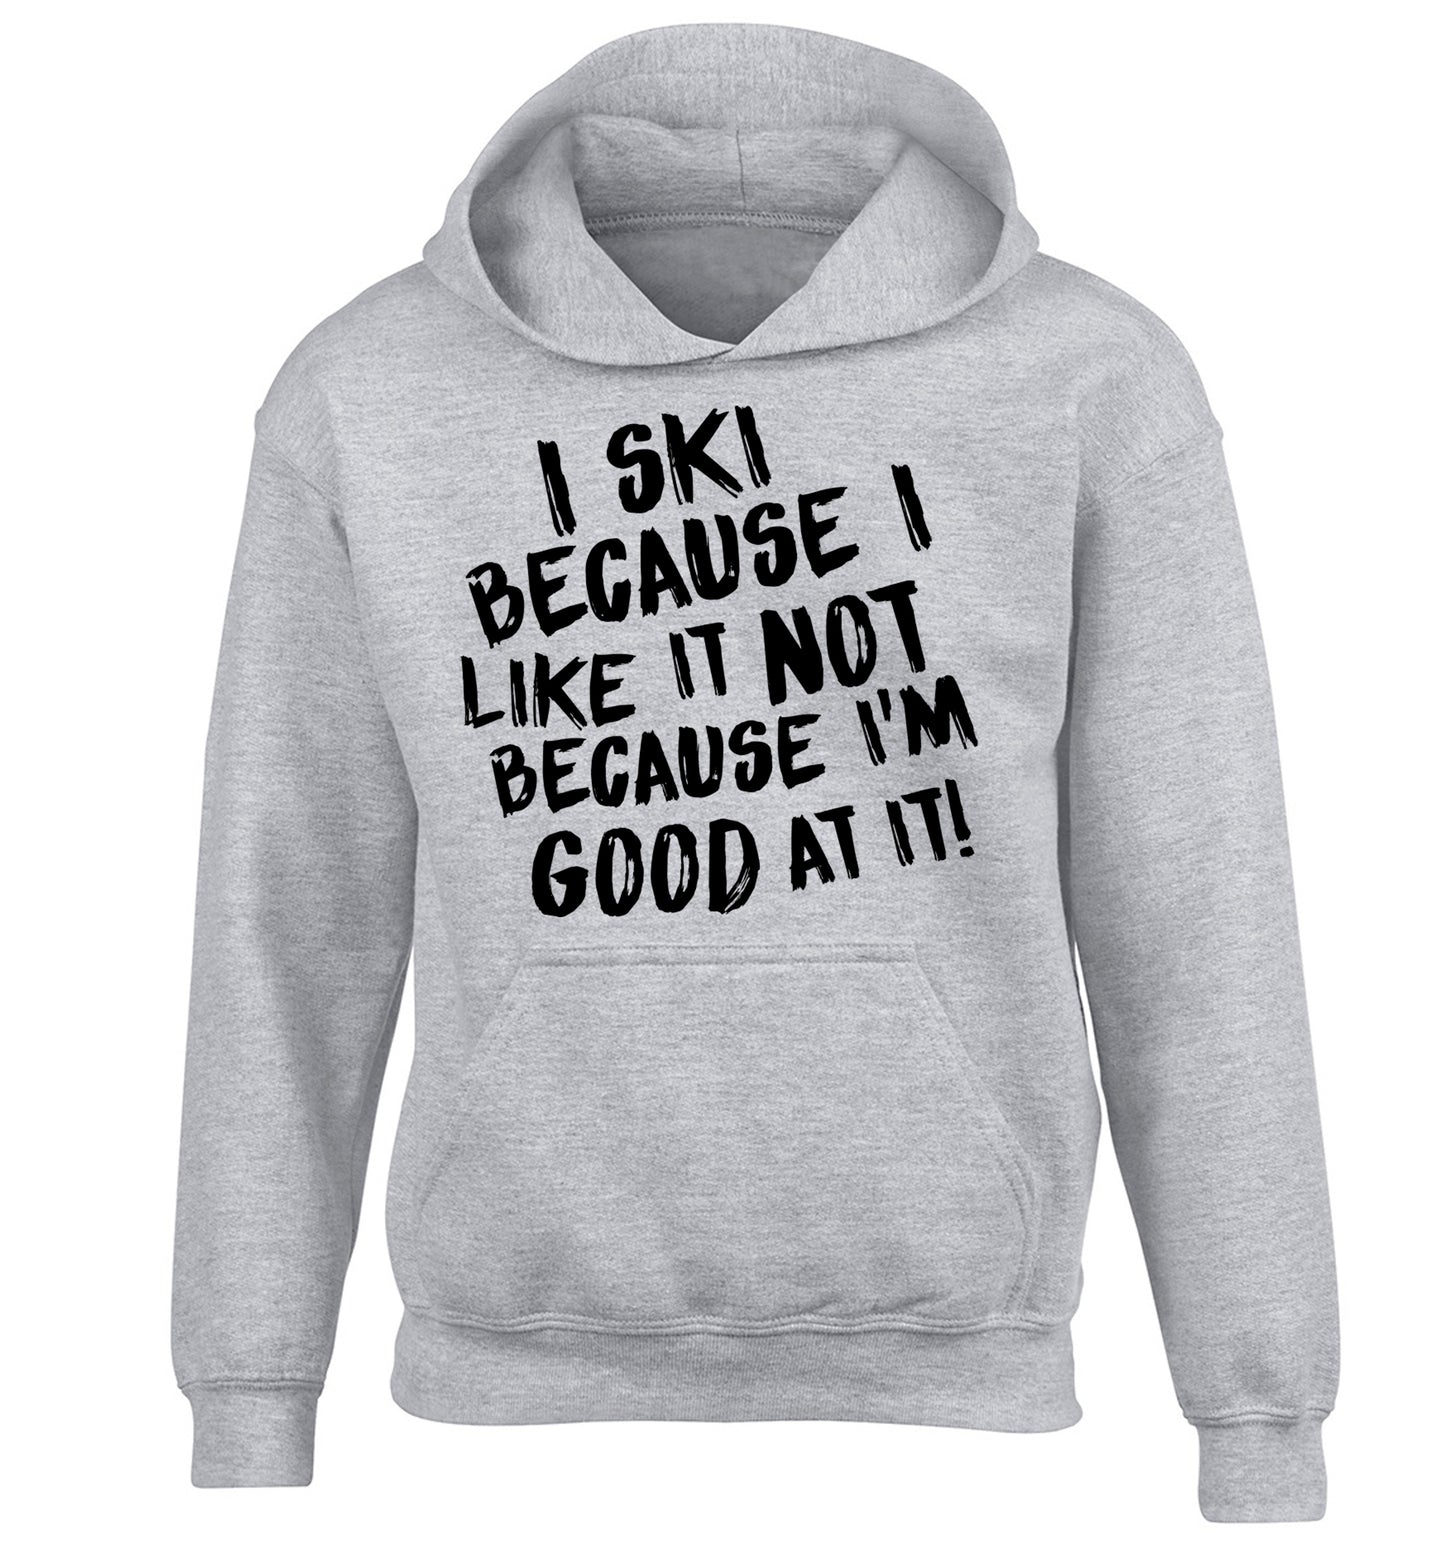 I ski because I like it not because I'm good at it children's grey hoodie 12-14 Years